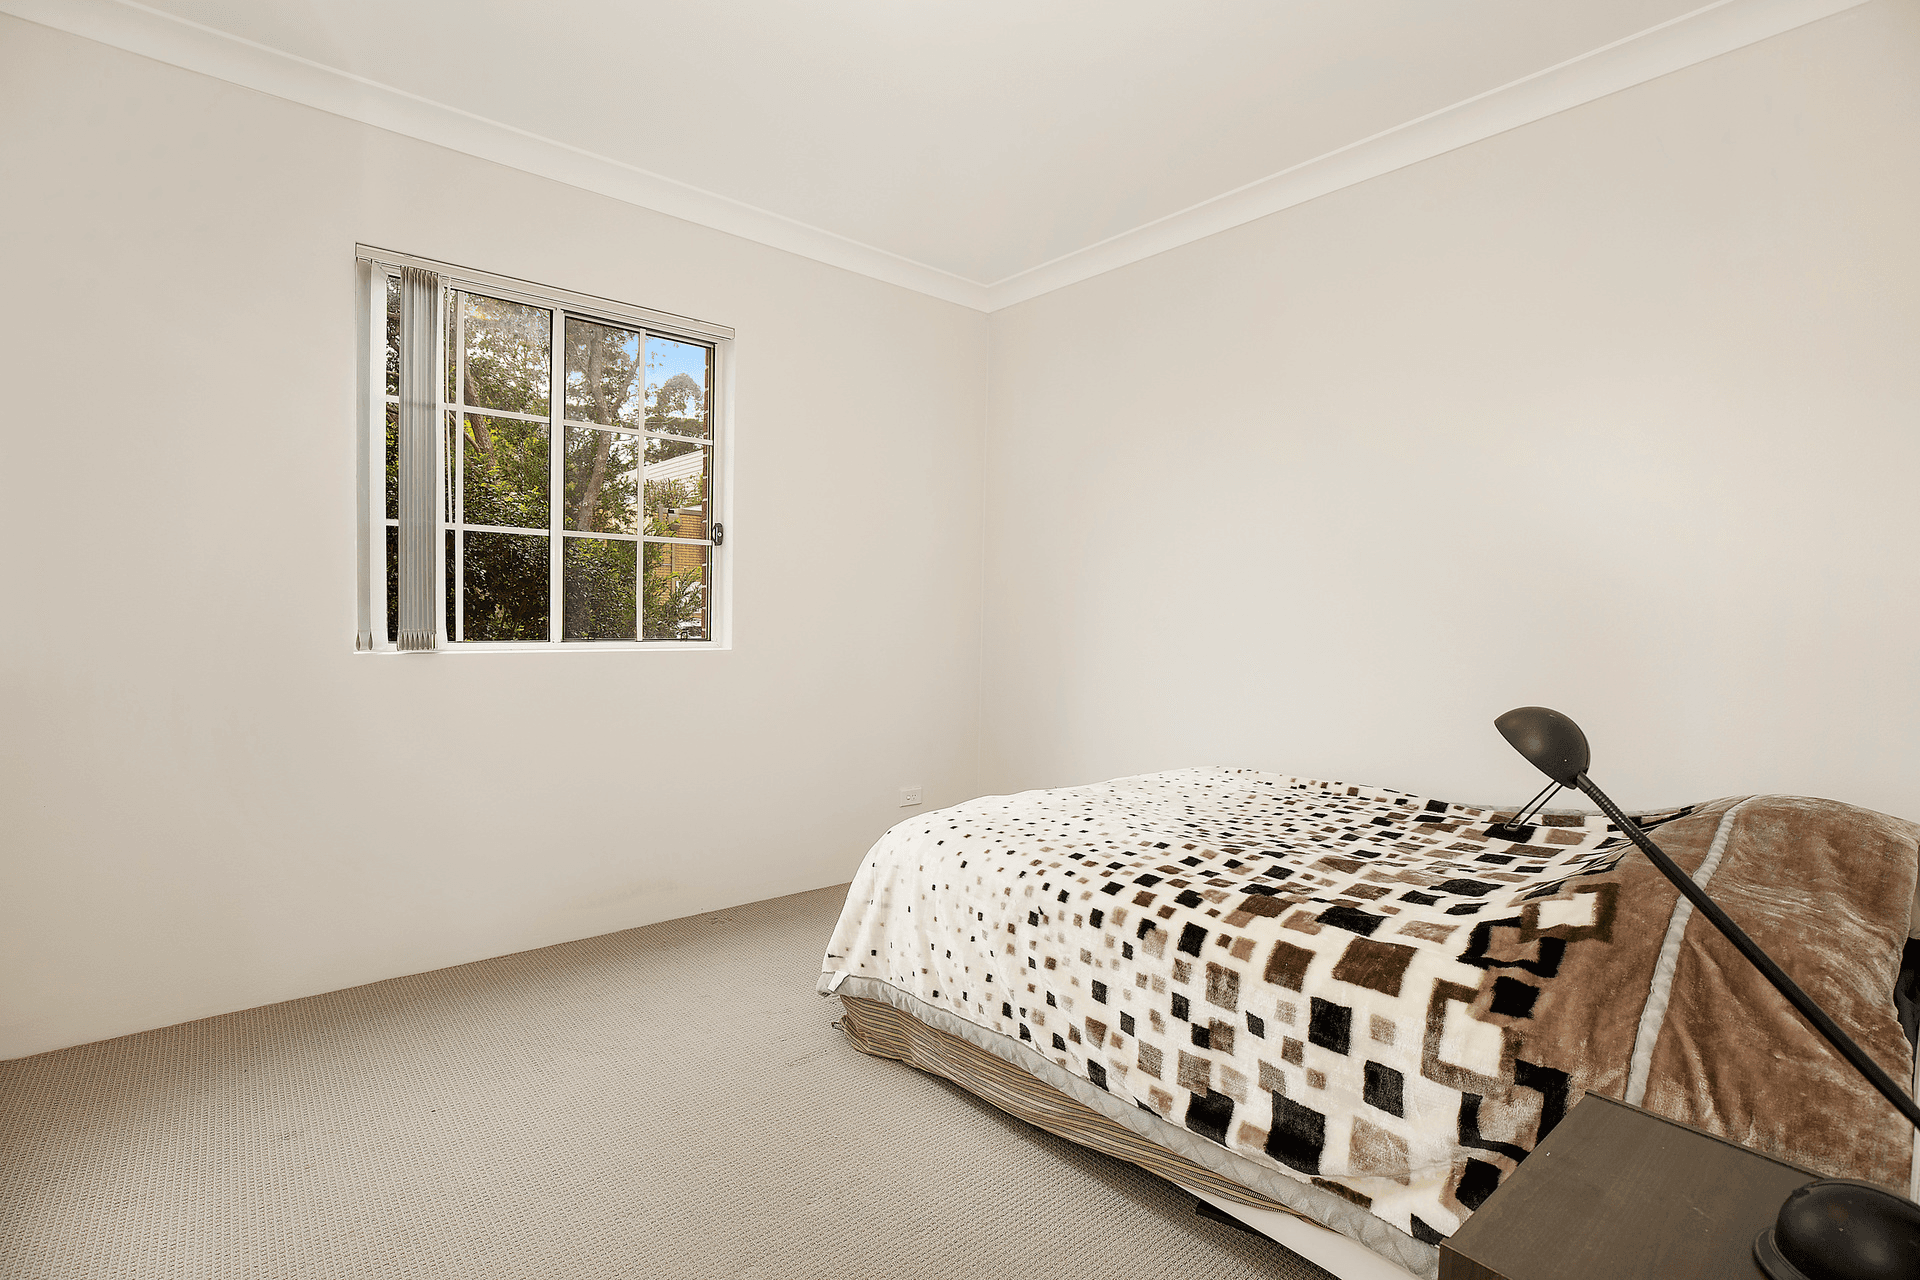 8/29 Alison Road, Wyong, NSW 2259